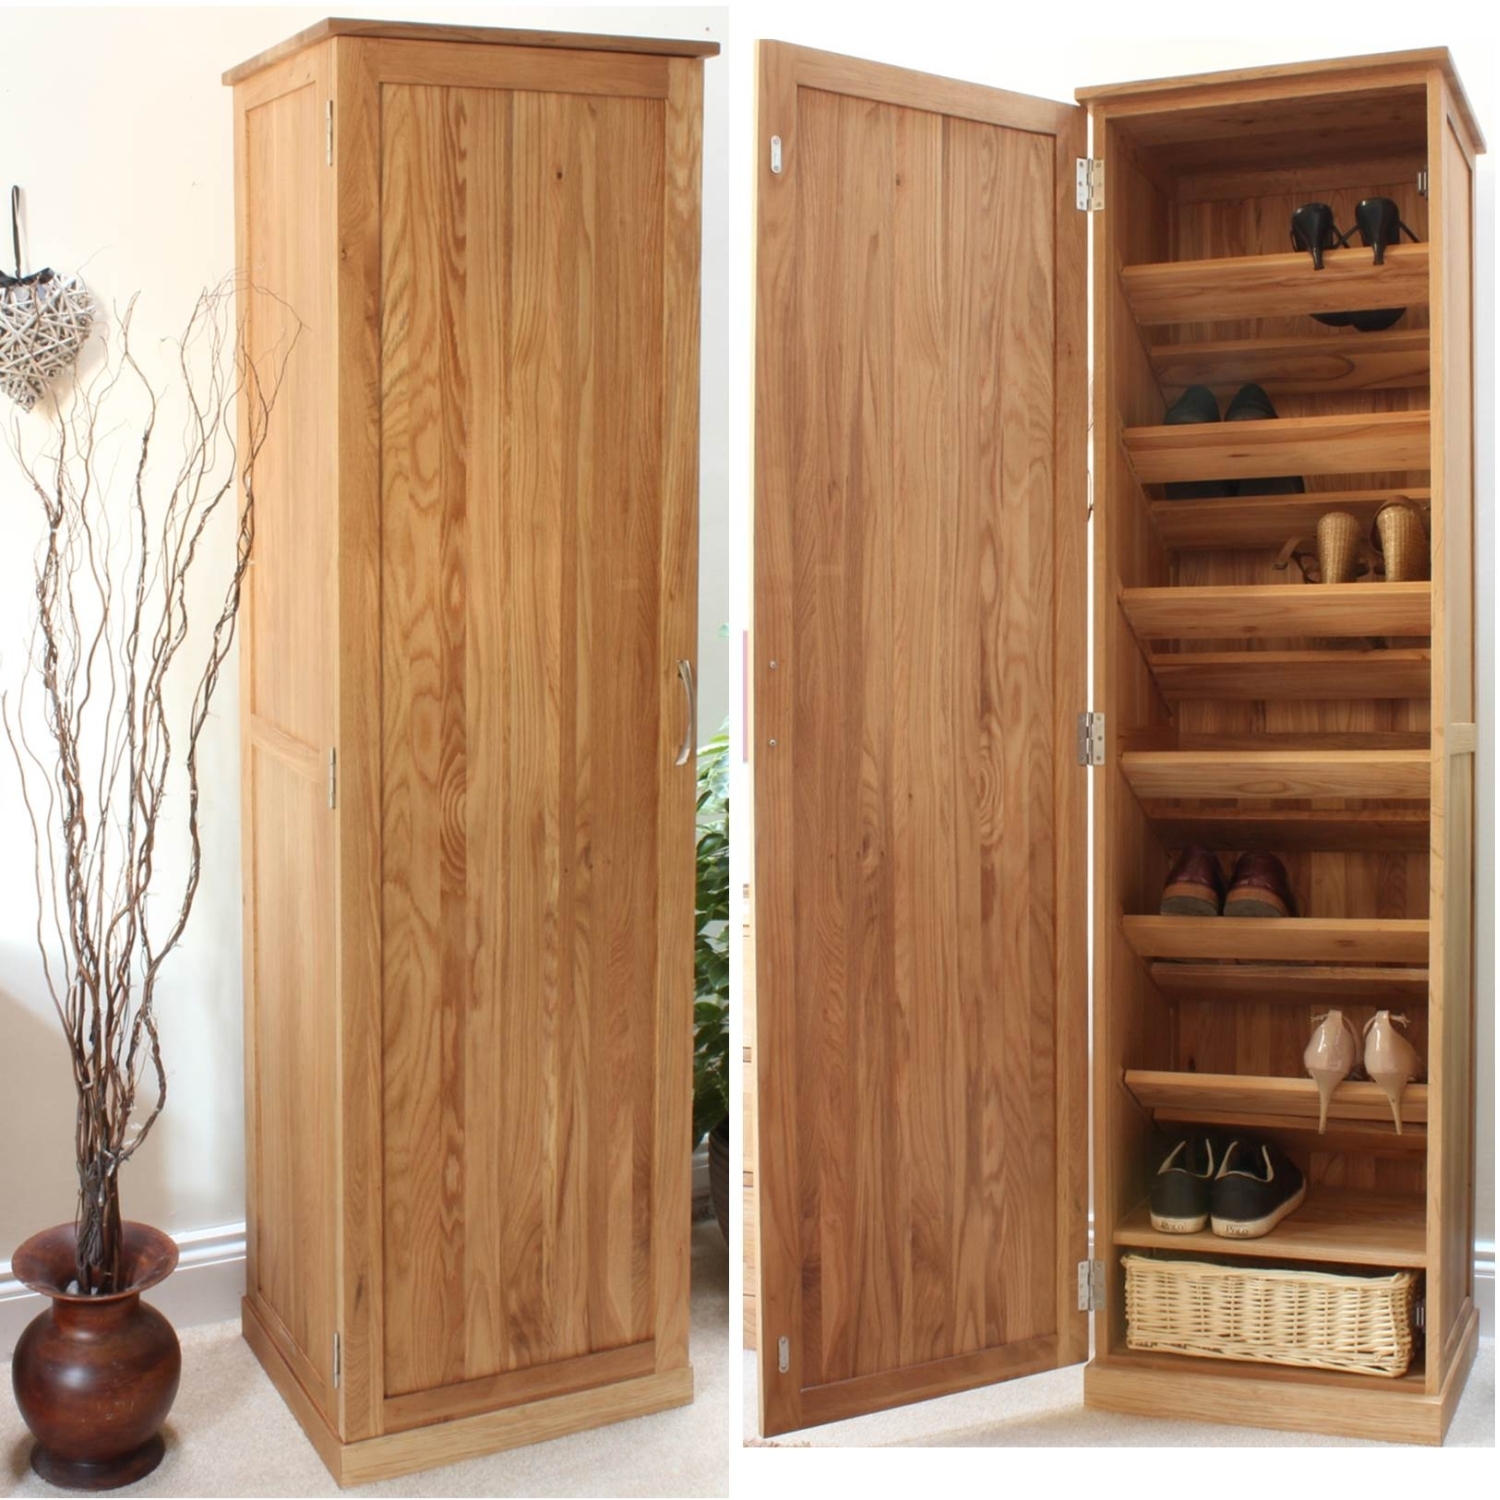 Storage Cabinets With Doors Visualhunt, Wooden Cabinet With Doors And Shelves